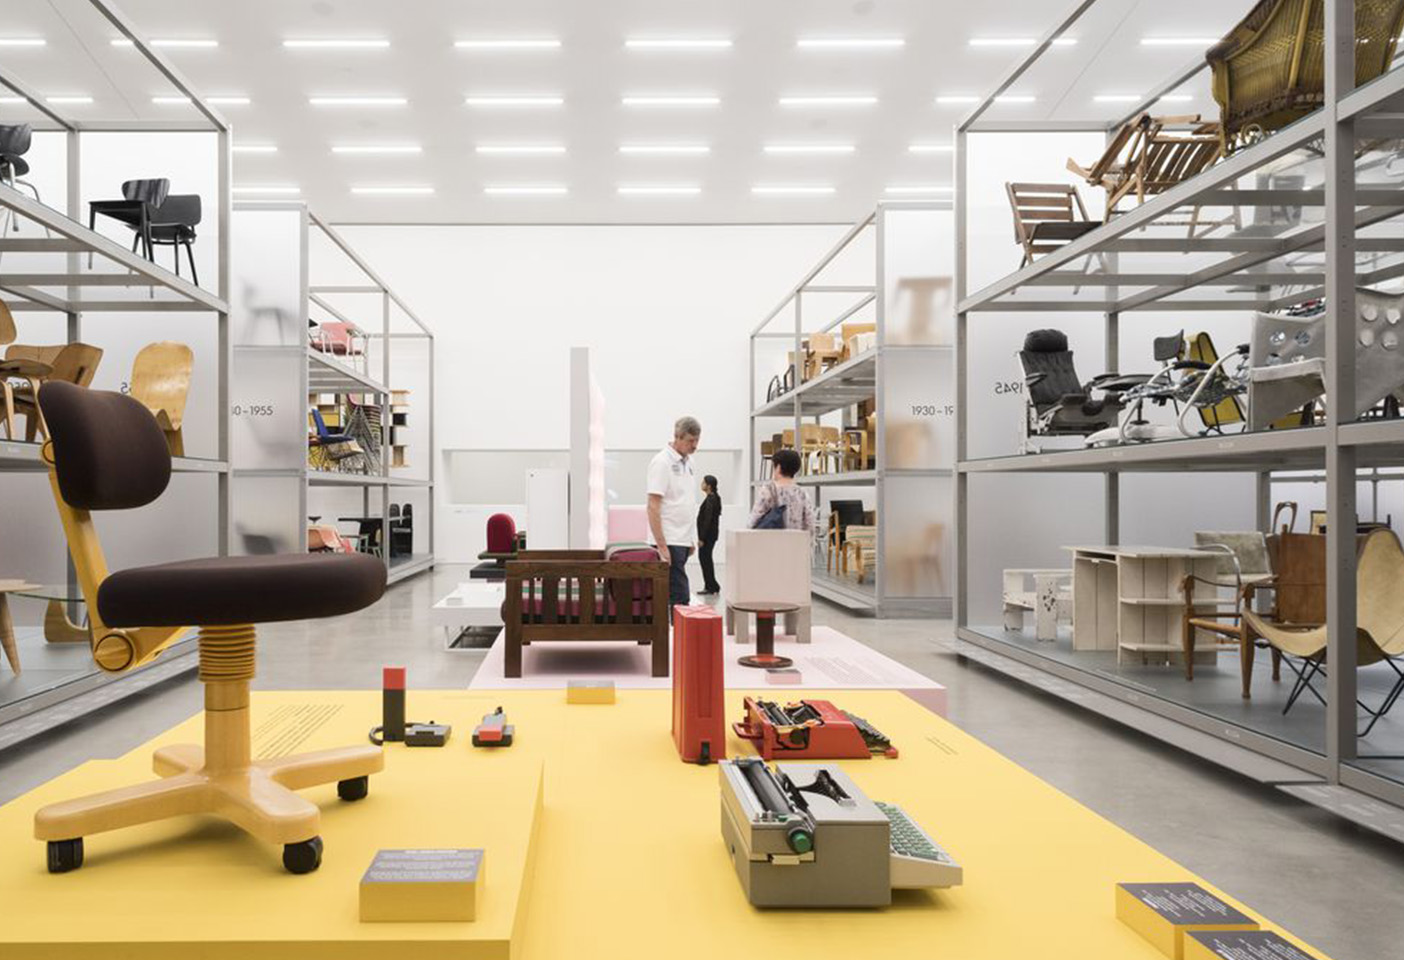  ‘Poet and Rebel: Ettore Sottsass and the Memphis Legacy' exhibit